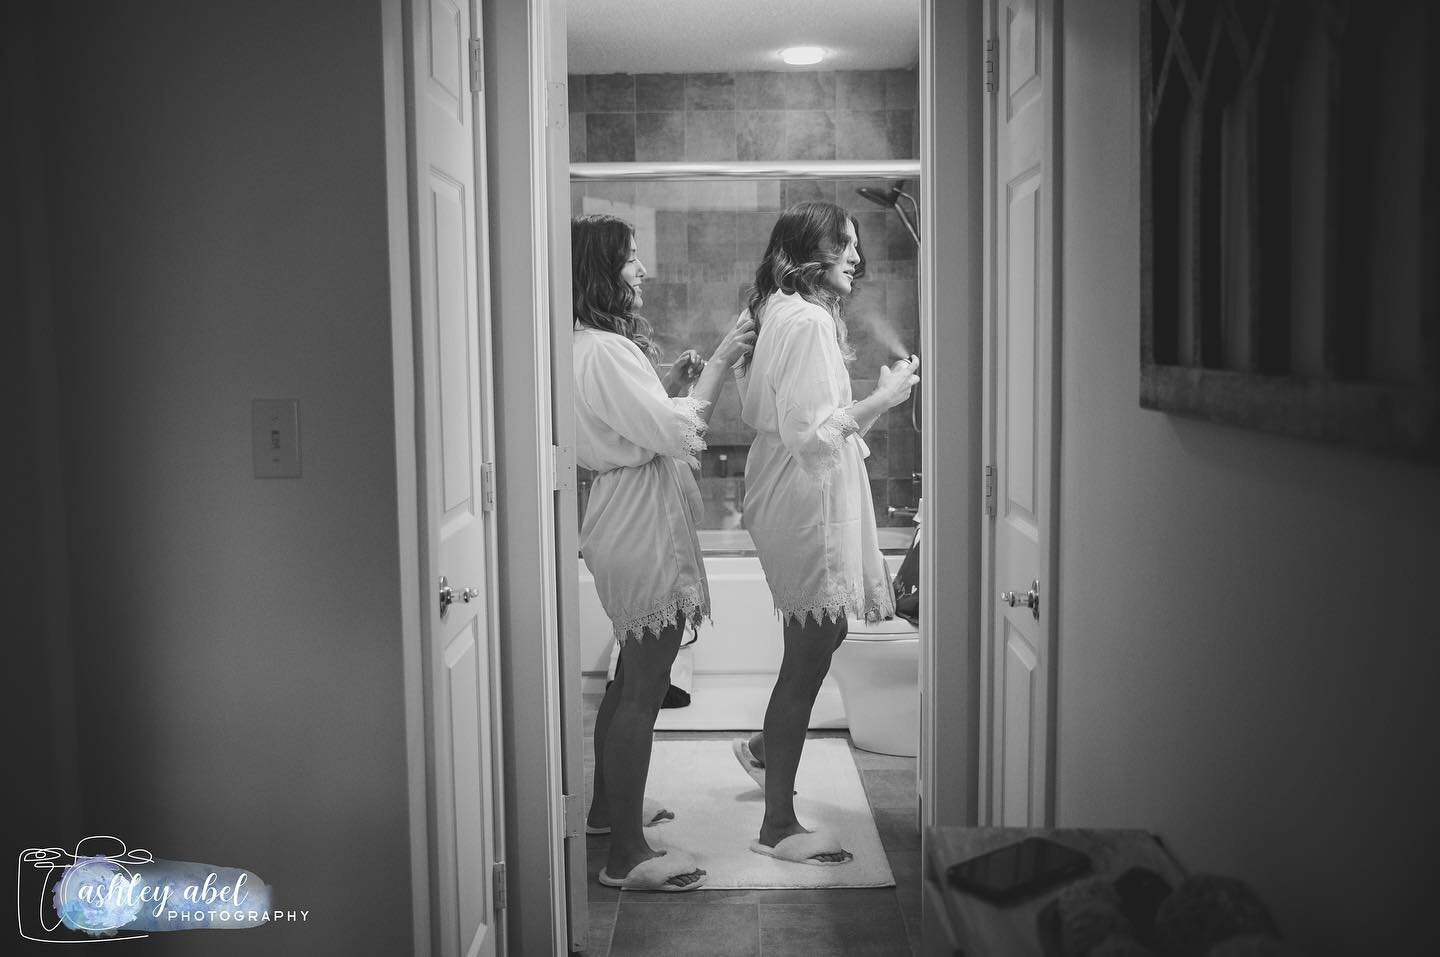 Came up the stairs and the light was just hitting the perfect way. Love getting candids of the bridesmaids getting ready too, not just the bride. ☺️
.
.
.
#bridesmaids #weddings #weddingphotographer #ctwedding #ctweddings #gettingready #connecticutwe